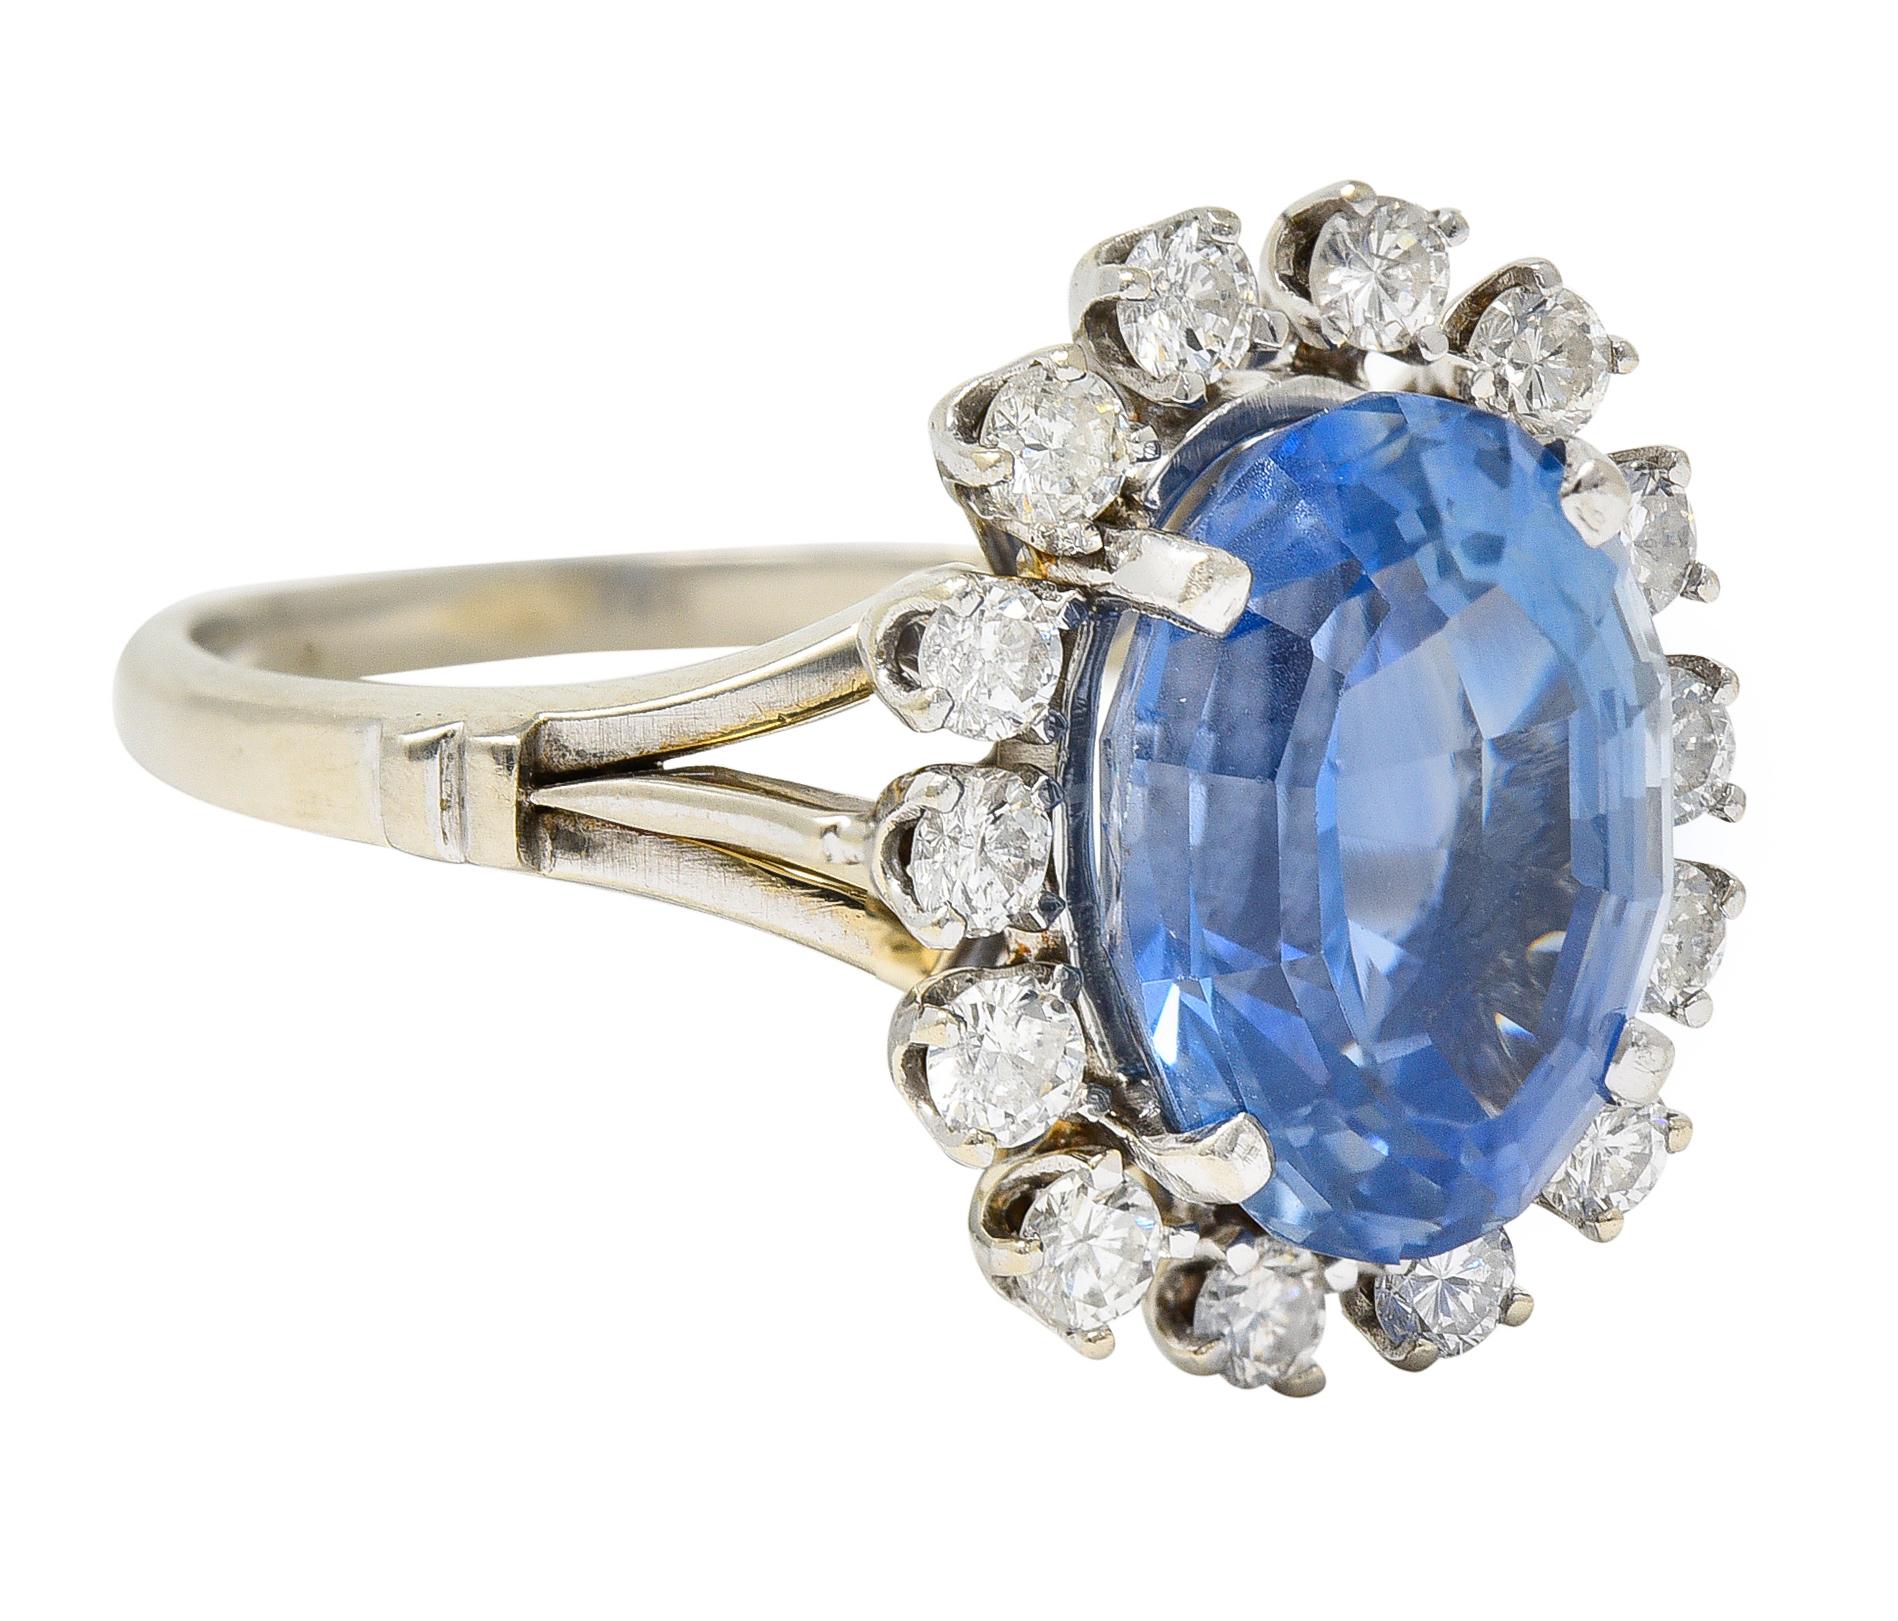 Centering an oval step cut sapphire weighing 6.47 carats - transparent light cornflower blue. Natural Ceylon in origin with no indications of heat treatment - prong set. With a halo surround of round brilliant cut diamonds. Weighing approximately